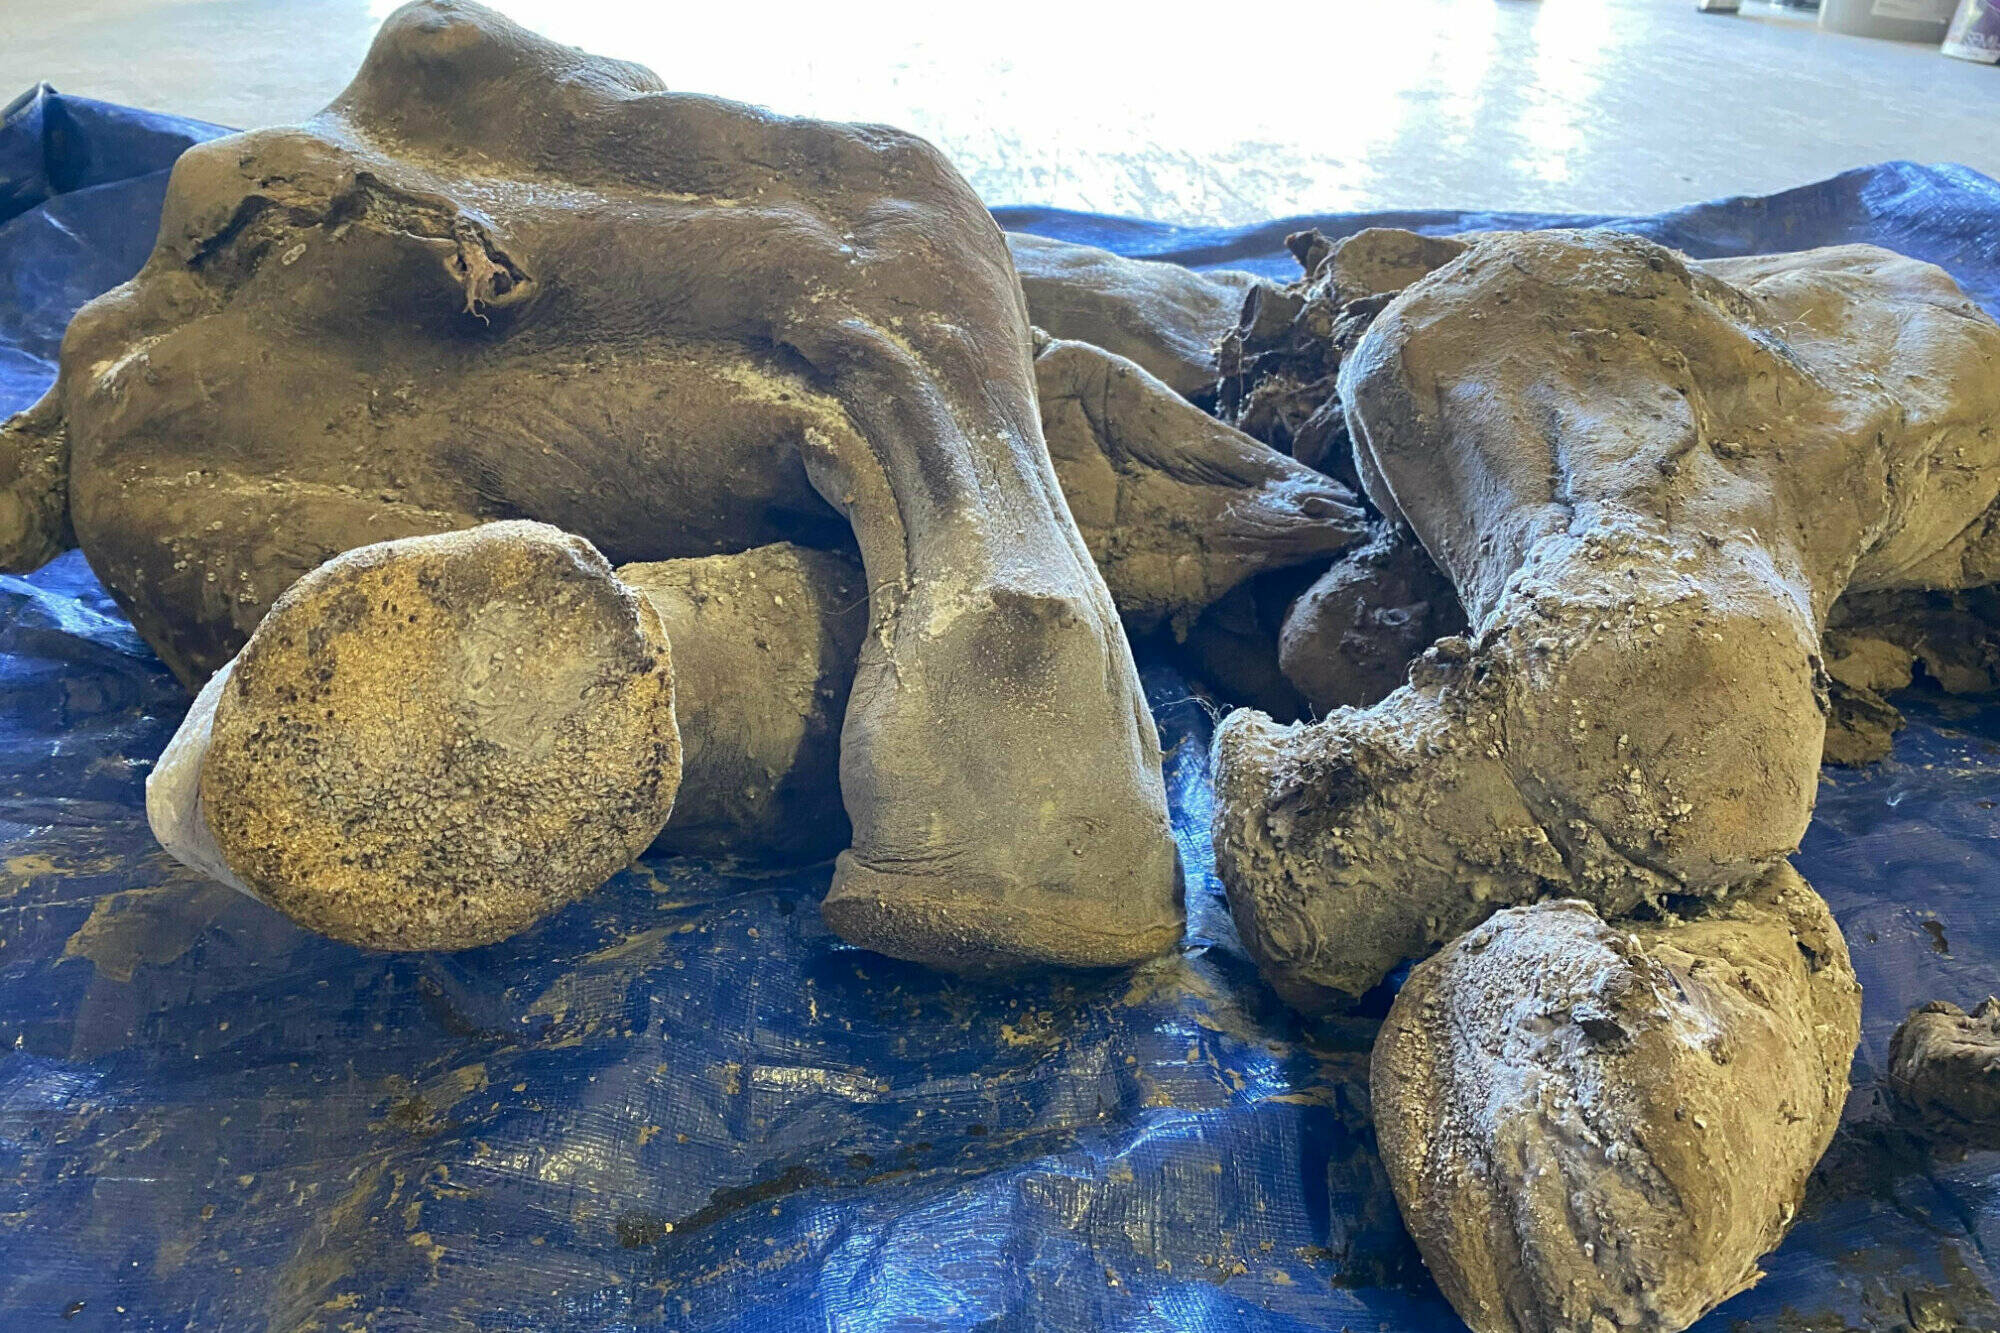 Nearly complete, 30,000-year-old mummified baby woolly mammoth discovered in Yukon - The Chilliwack Progress